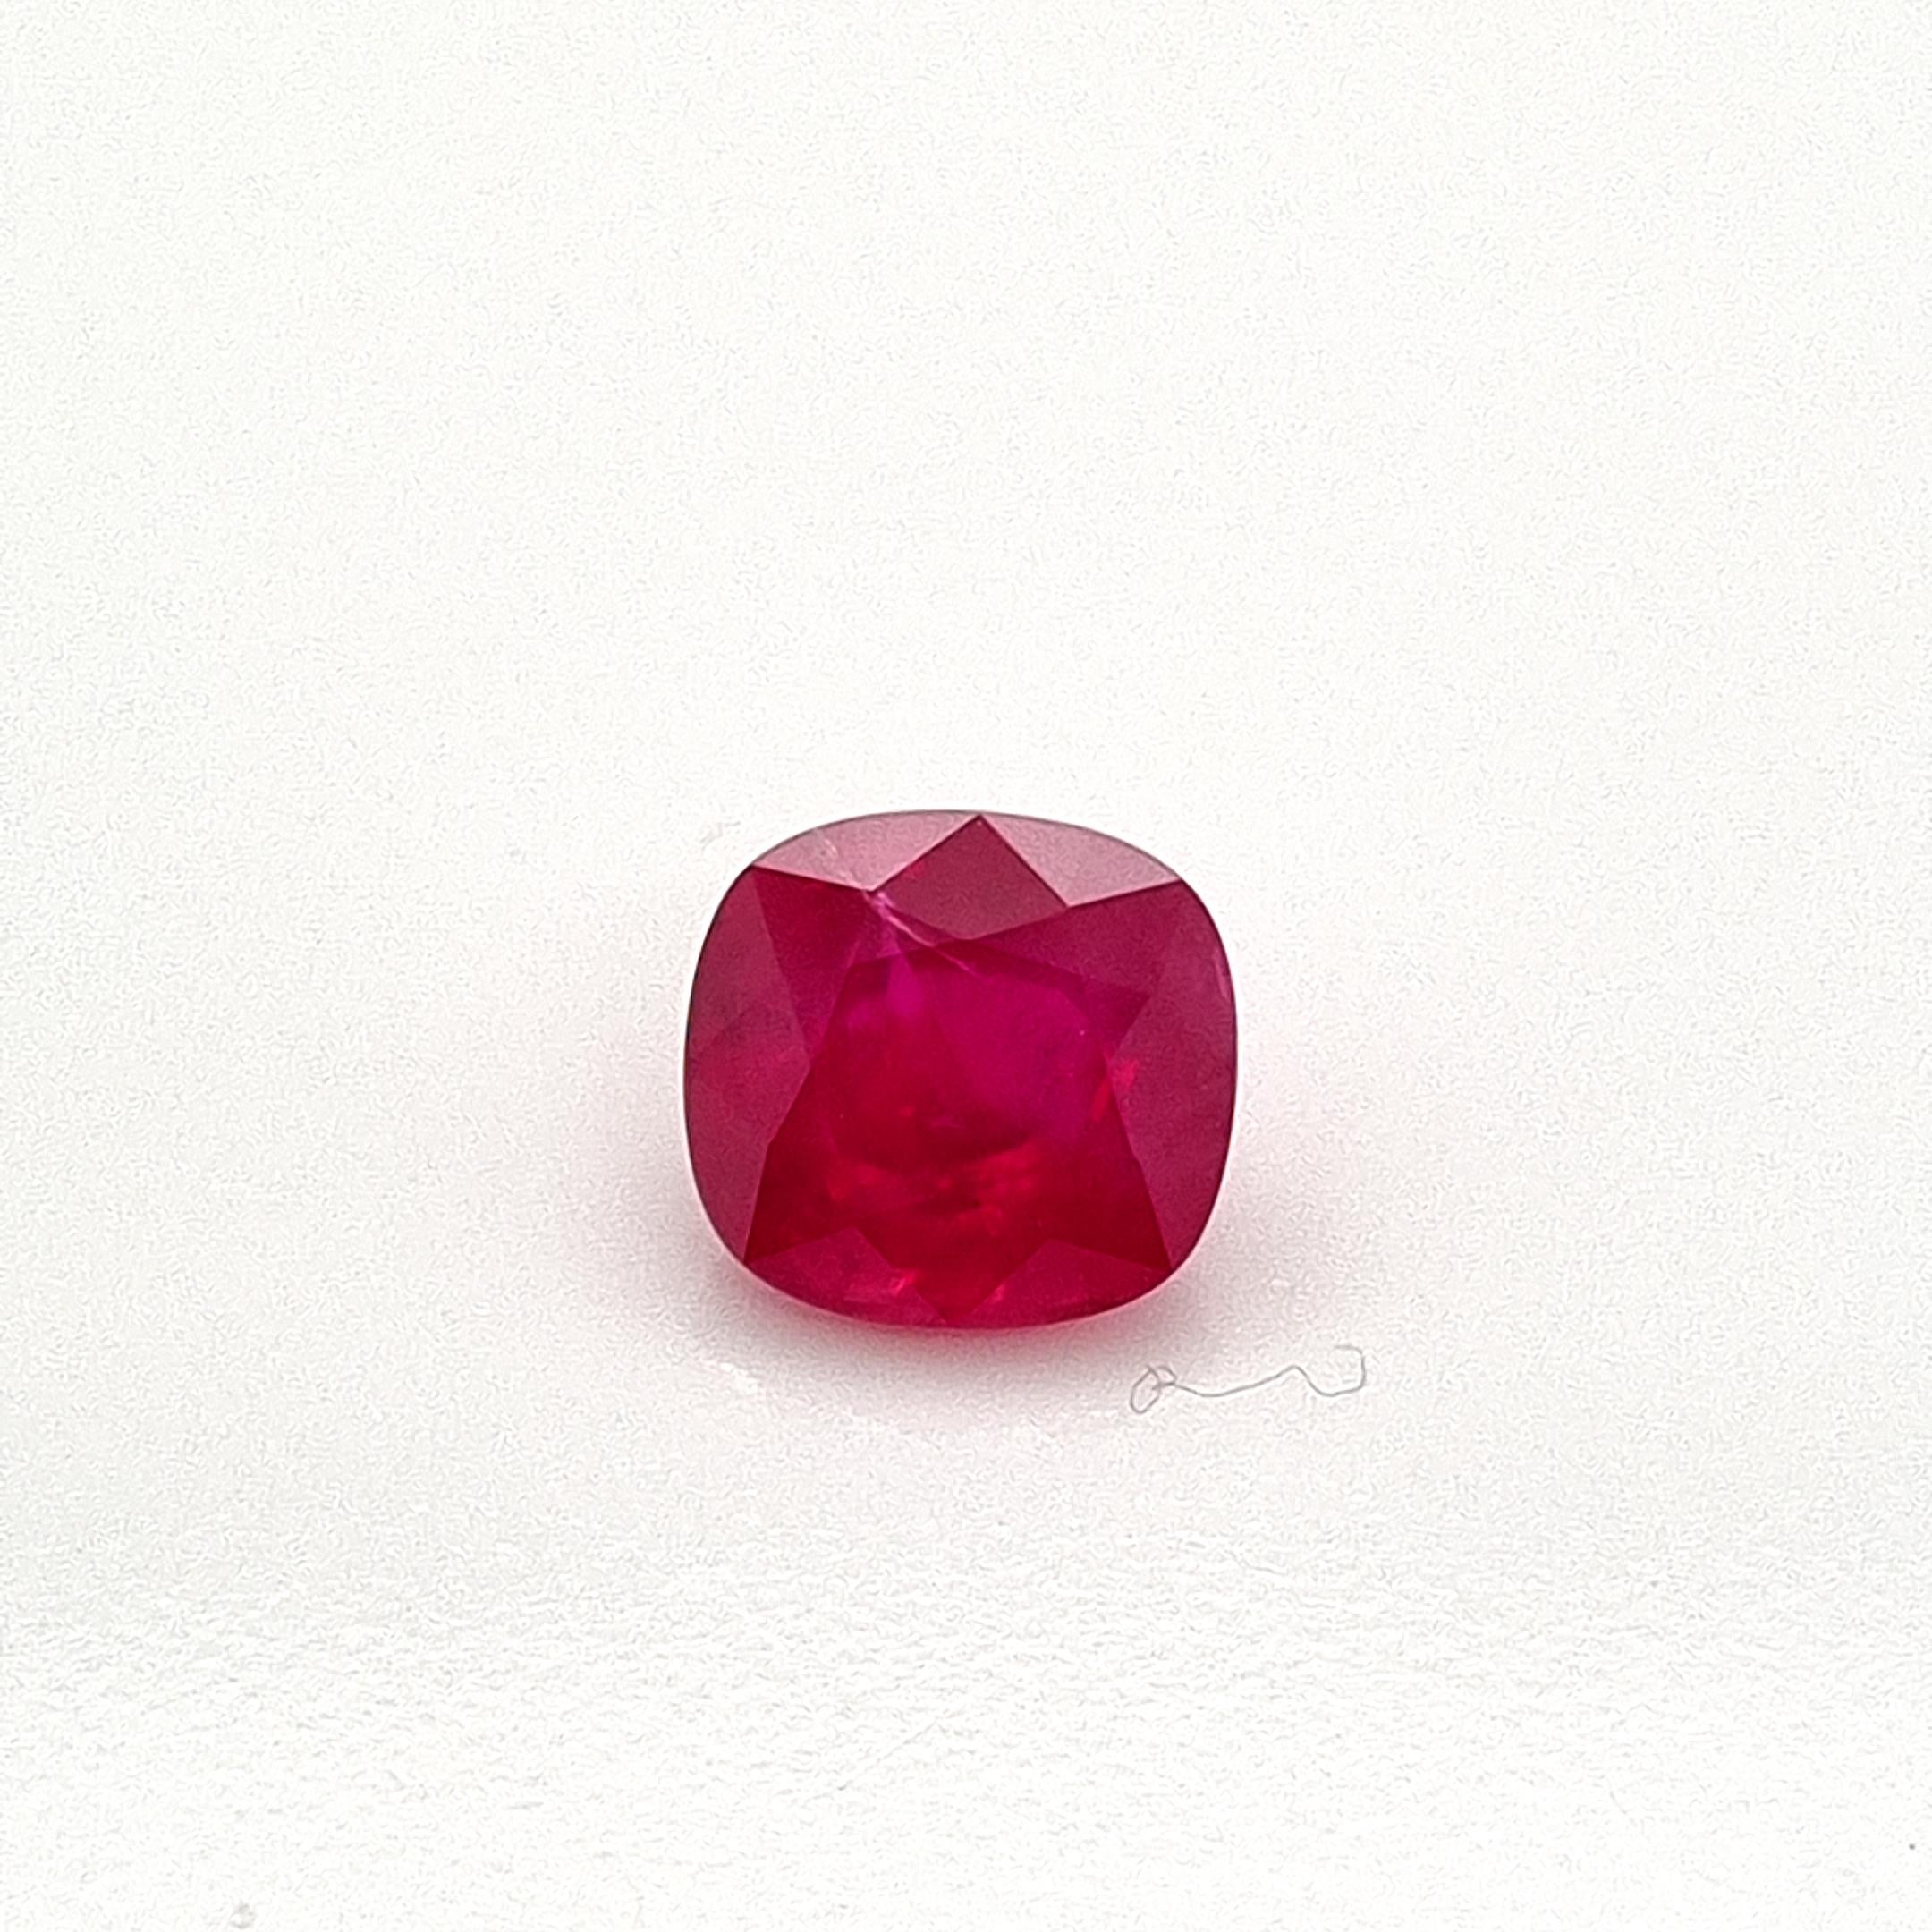 A 4.13 carat Unheated Burmese Ruby.

A Cushion cut, high quality unheated Burmese Ruby. 

Accompanied by a Gubelin Gemmological laboratory certificate dated 5th January 2022 stating that the ruby is of Burmese origin with no indications of heat